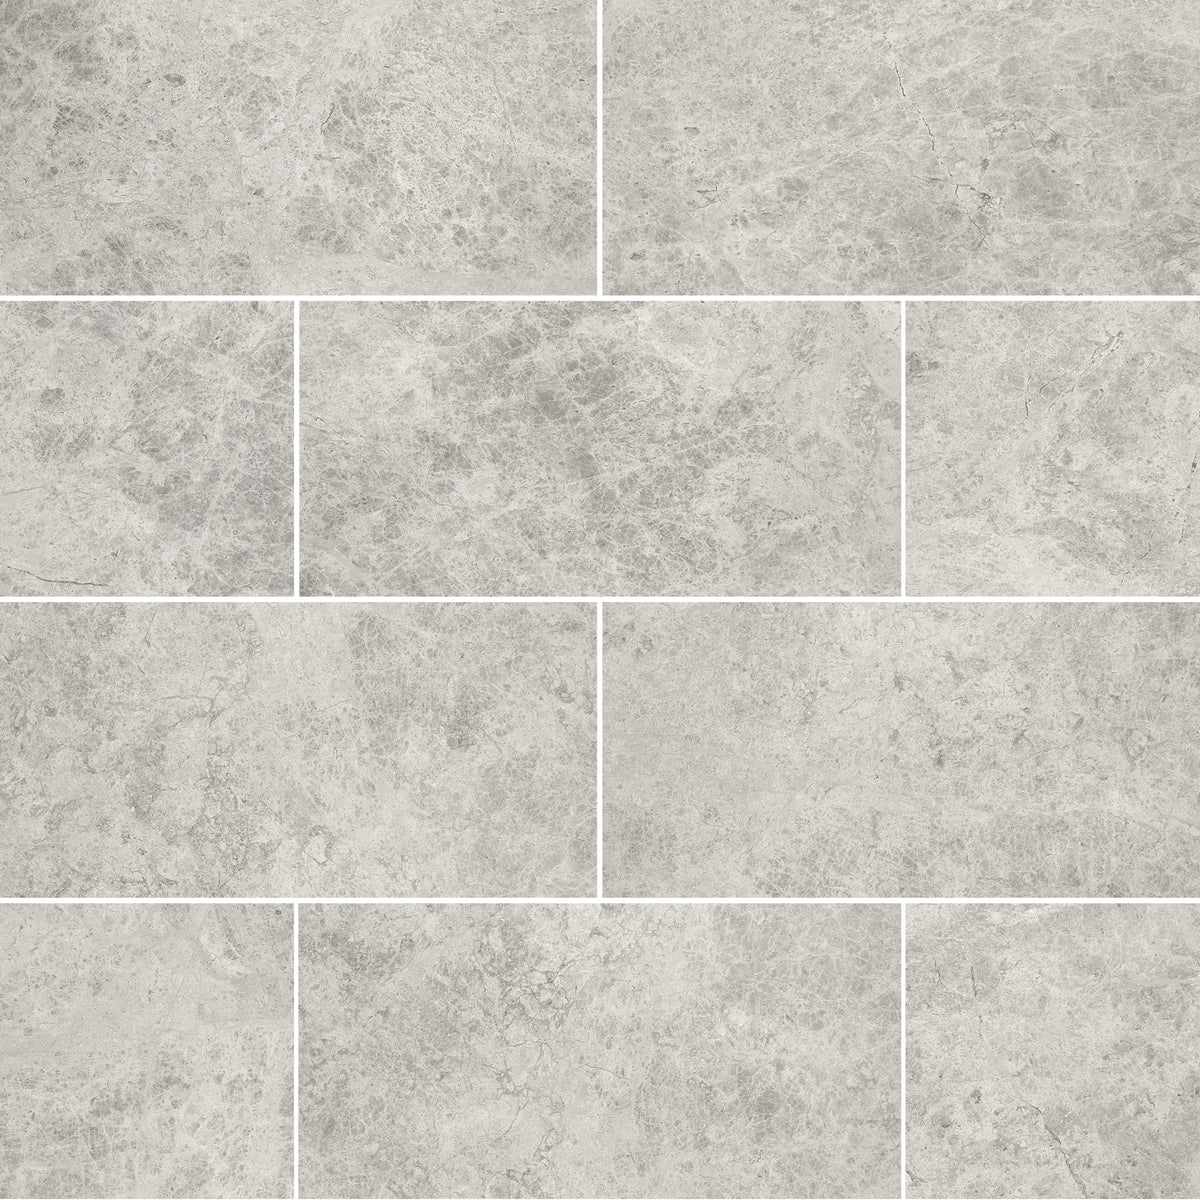 DW Tile &amp; Stone - Silver Shadow 12&quot; x 24&quot; Marble Tile - Polished Installed